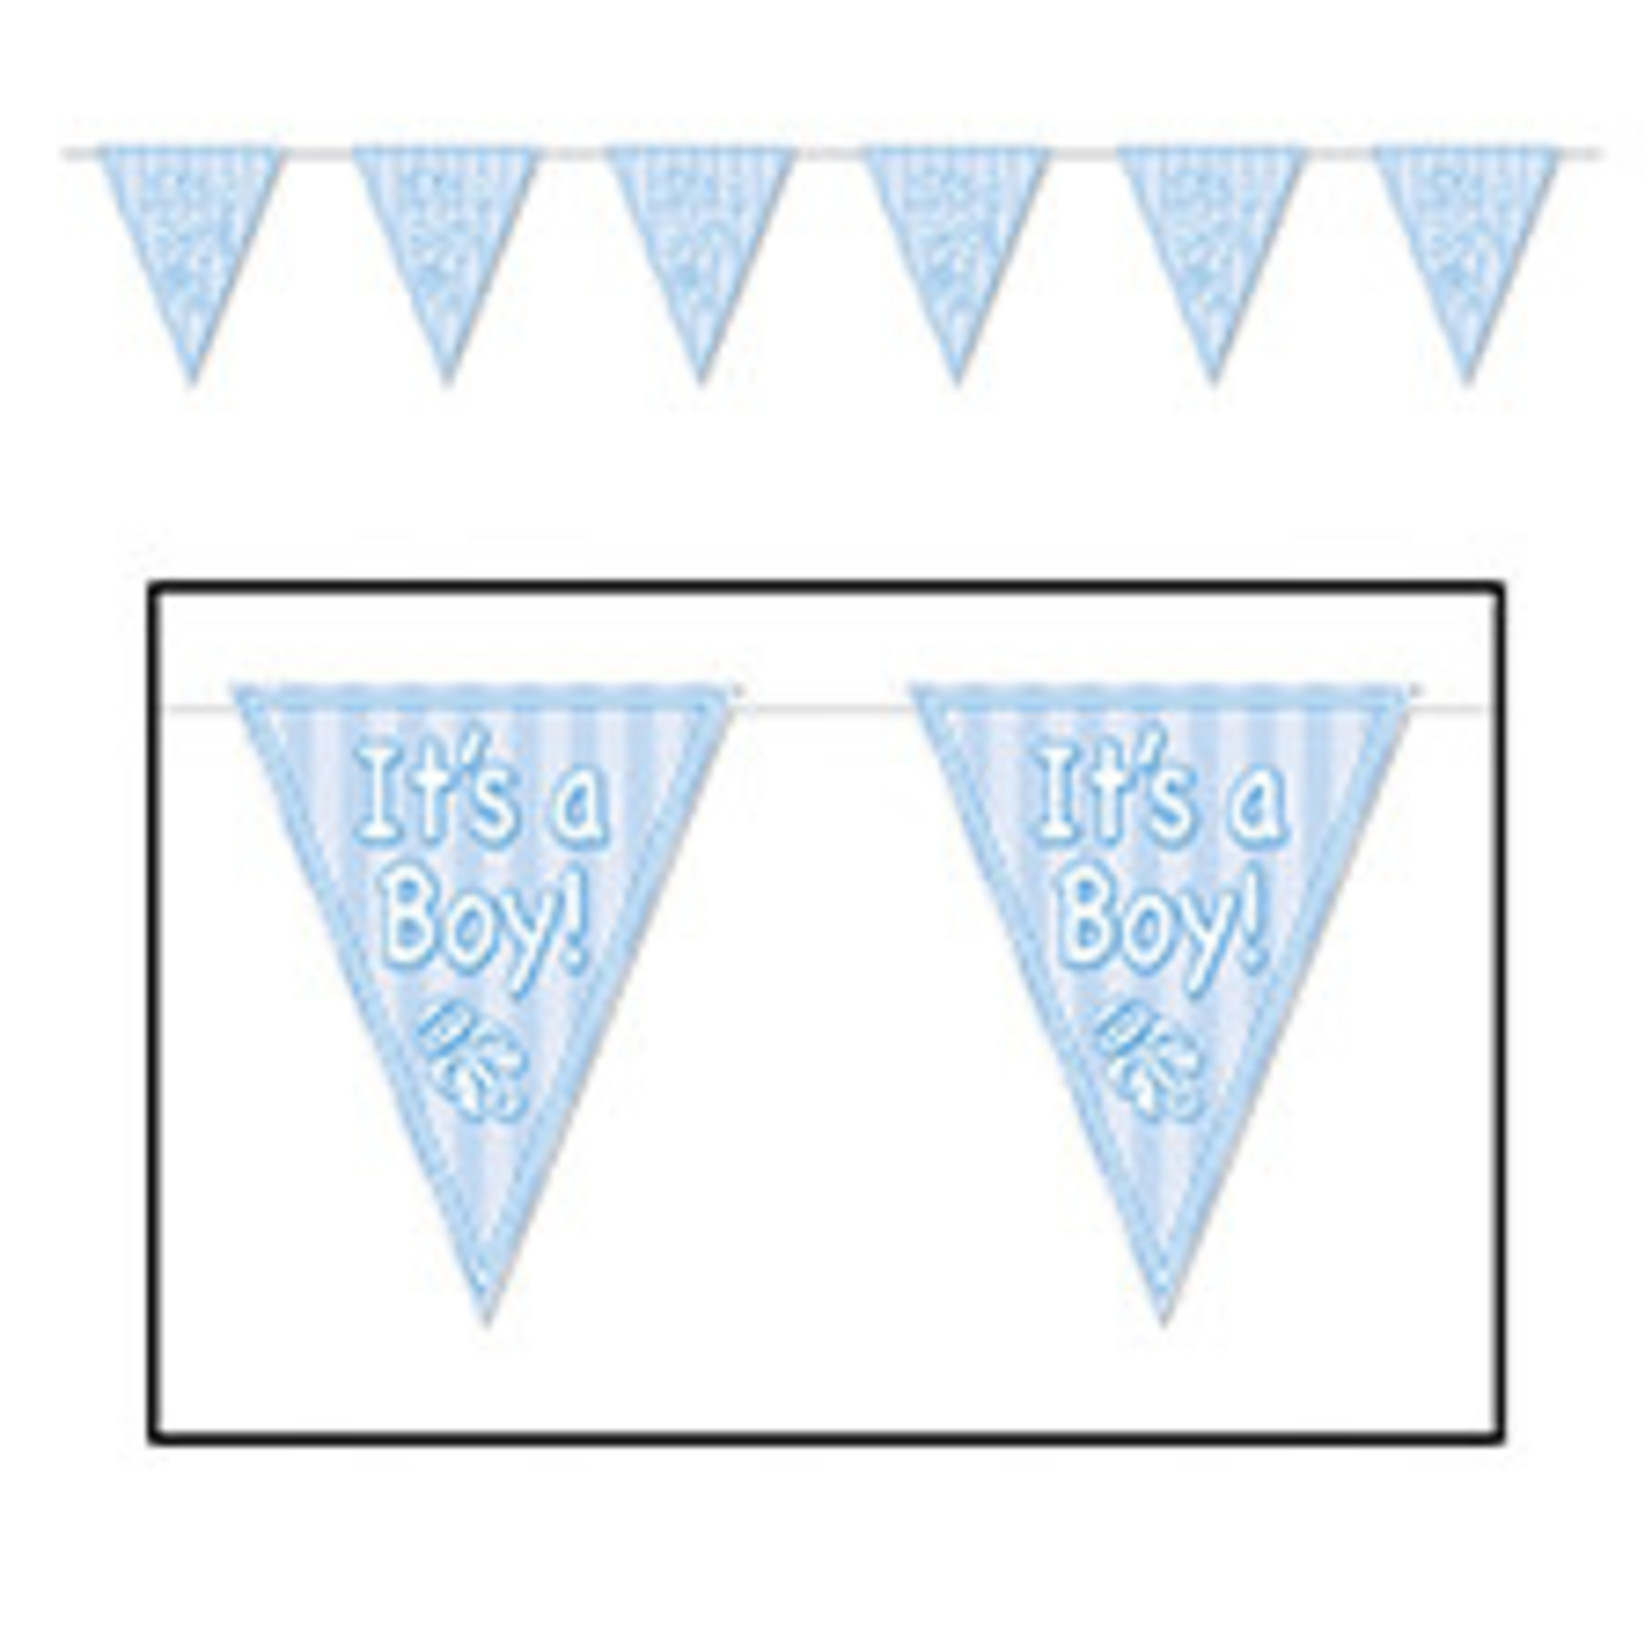 Beistle It's A Boy! Pennant Banner - 12ft.